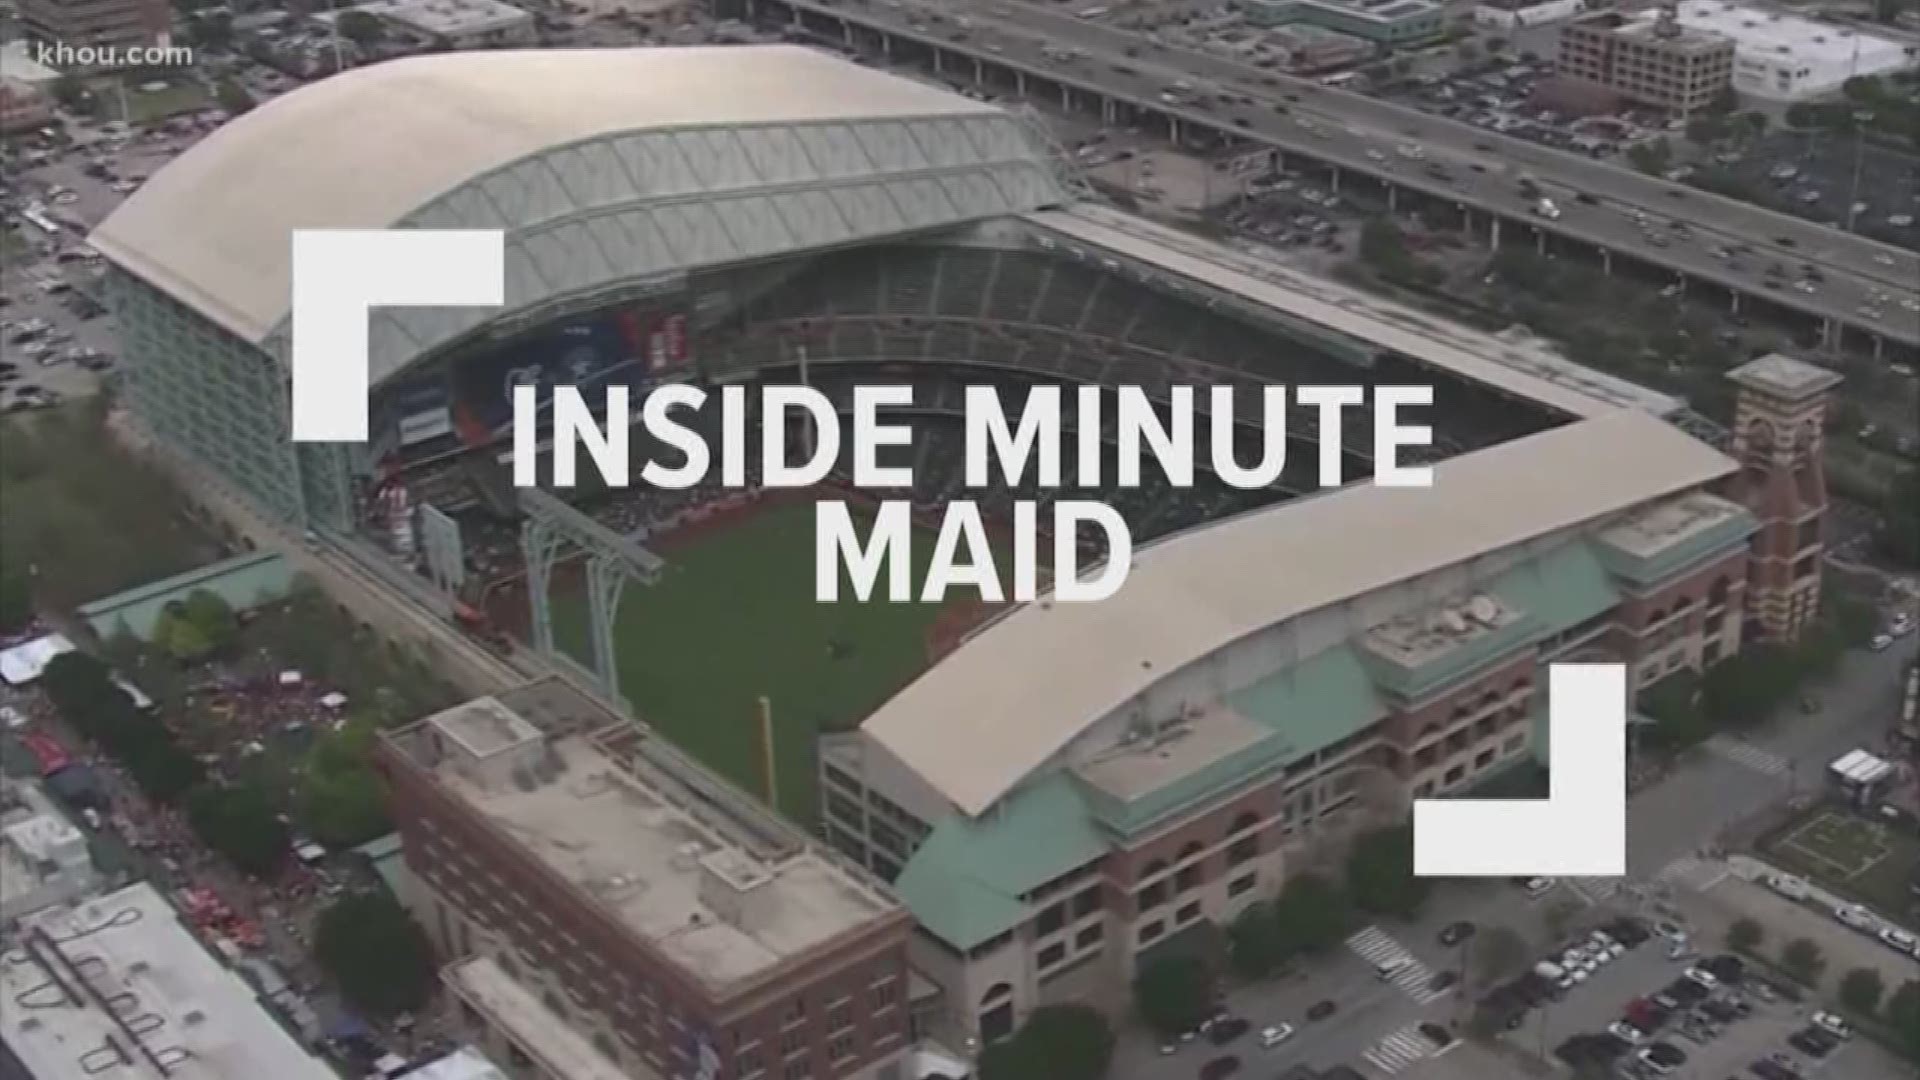 KHOU 11 was live at our Avenida Studio, Minute Maid Park and Street Fest to cover the Astros home-opener.